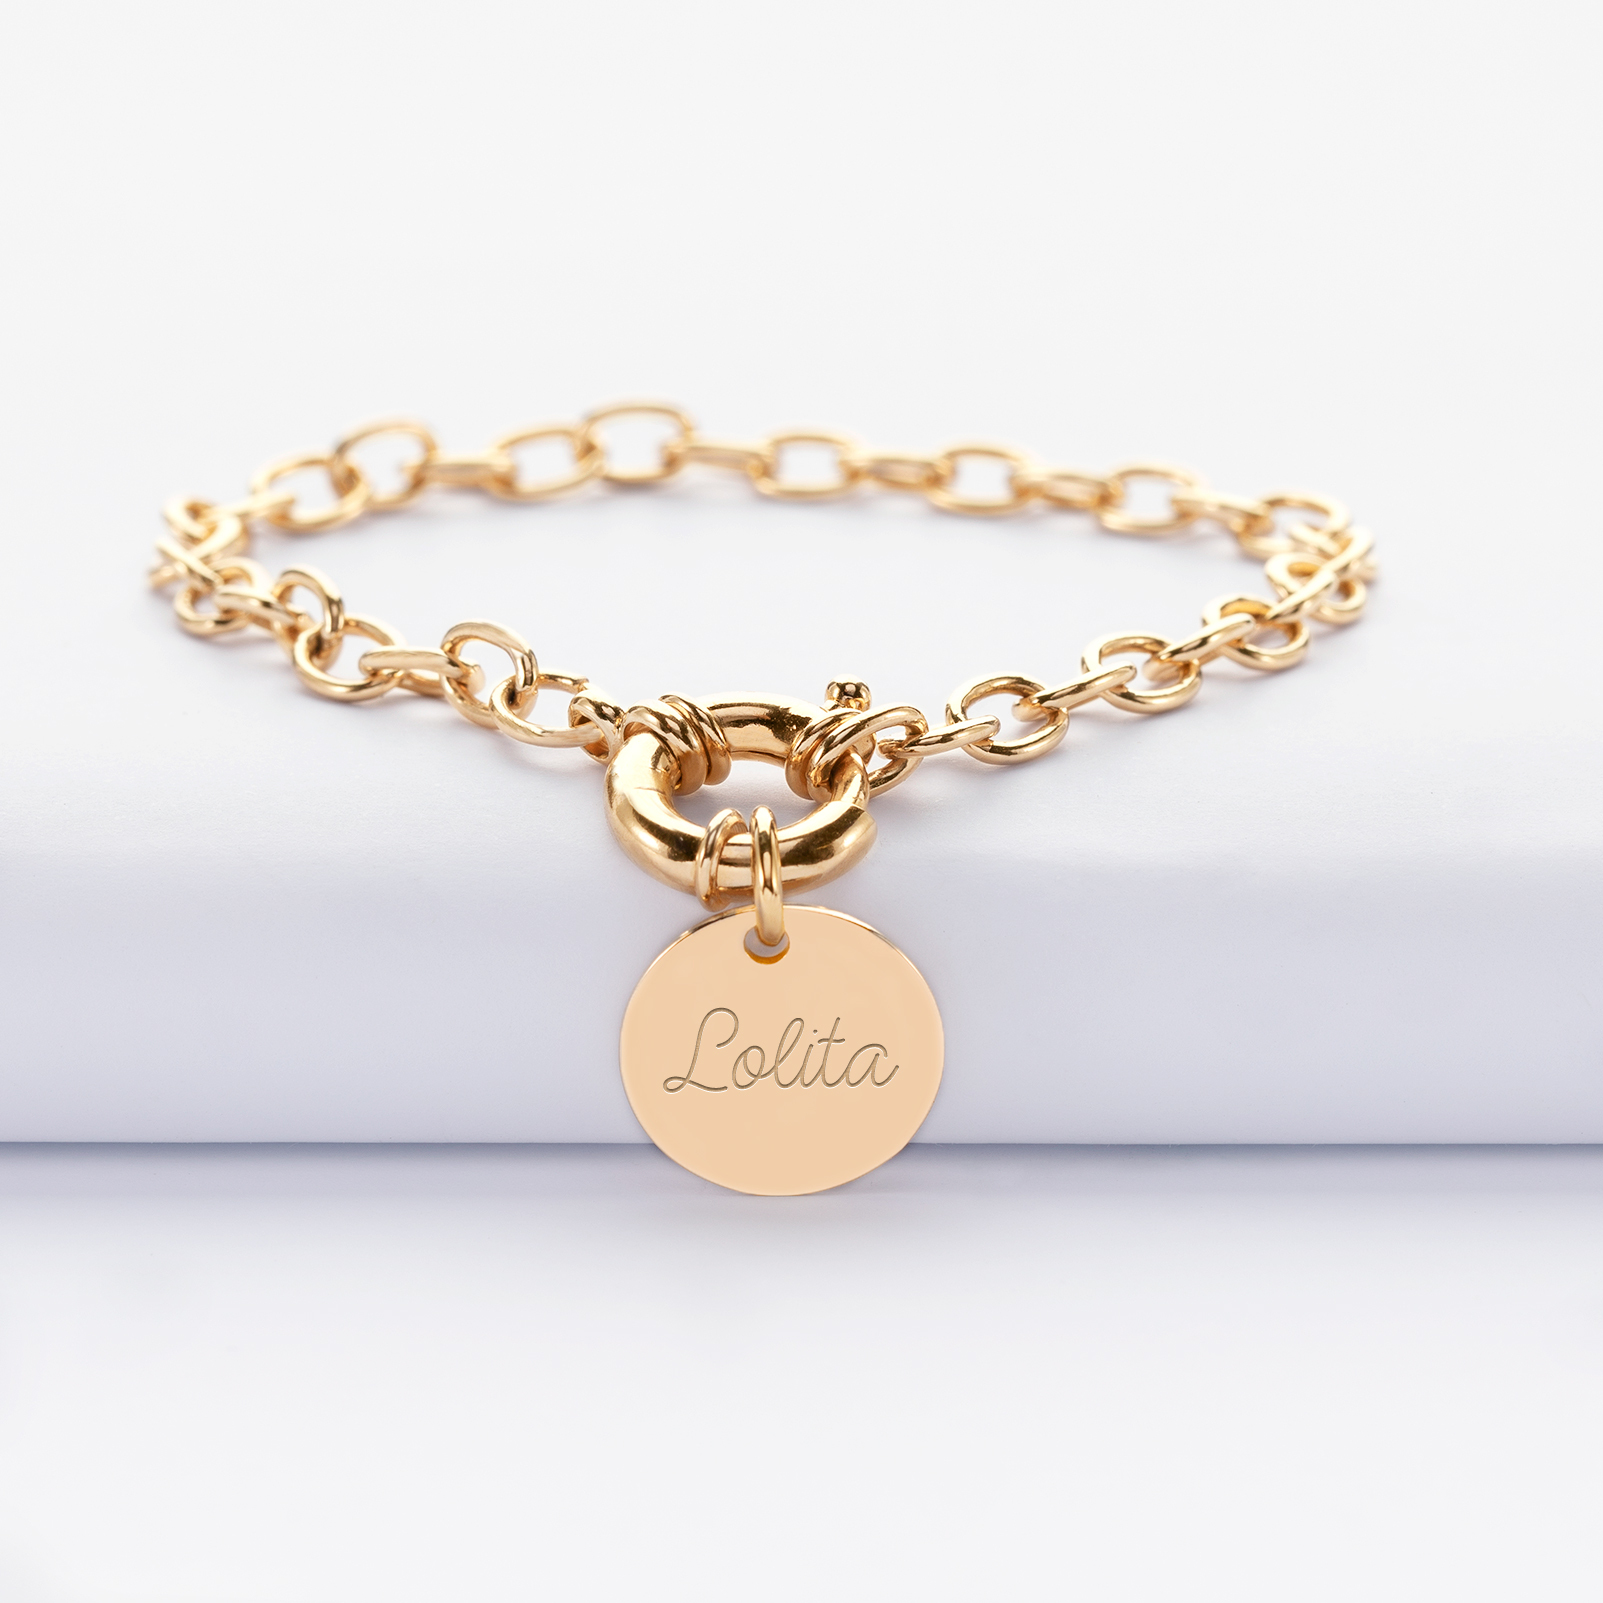 Customised bracelet chain clasp with engraved gold-plated medal 15 mm